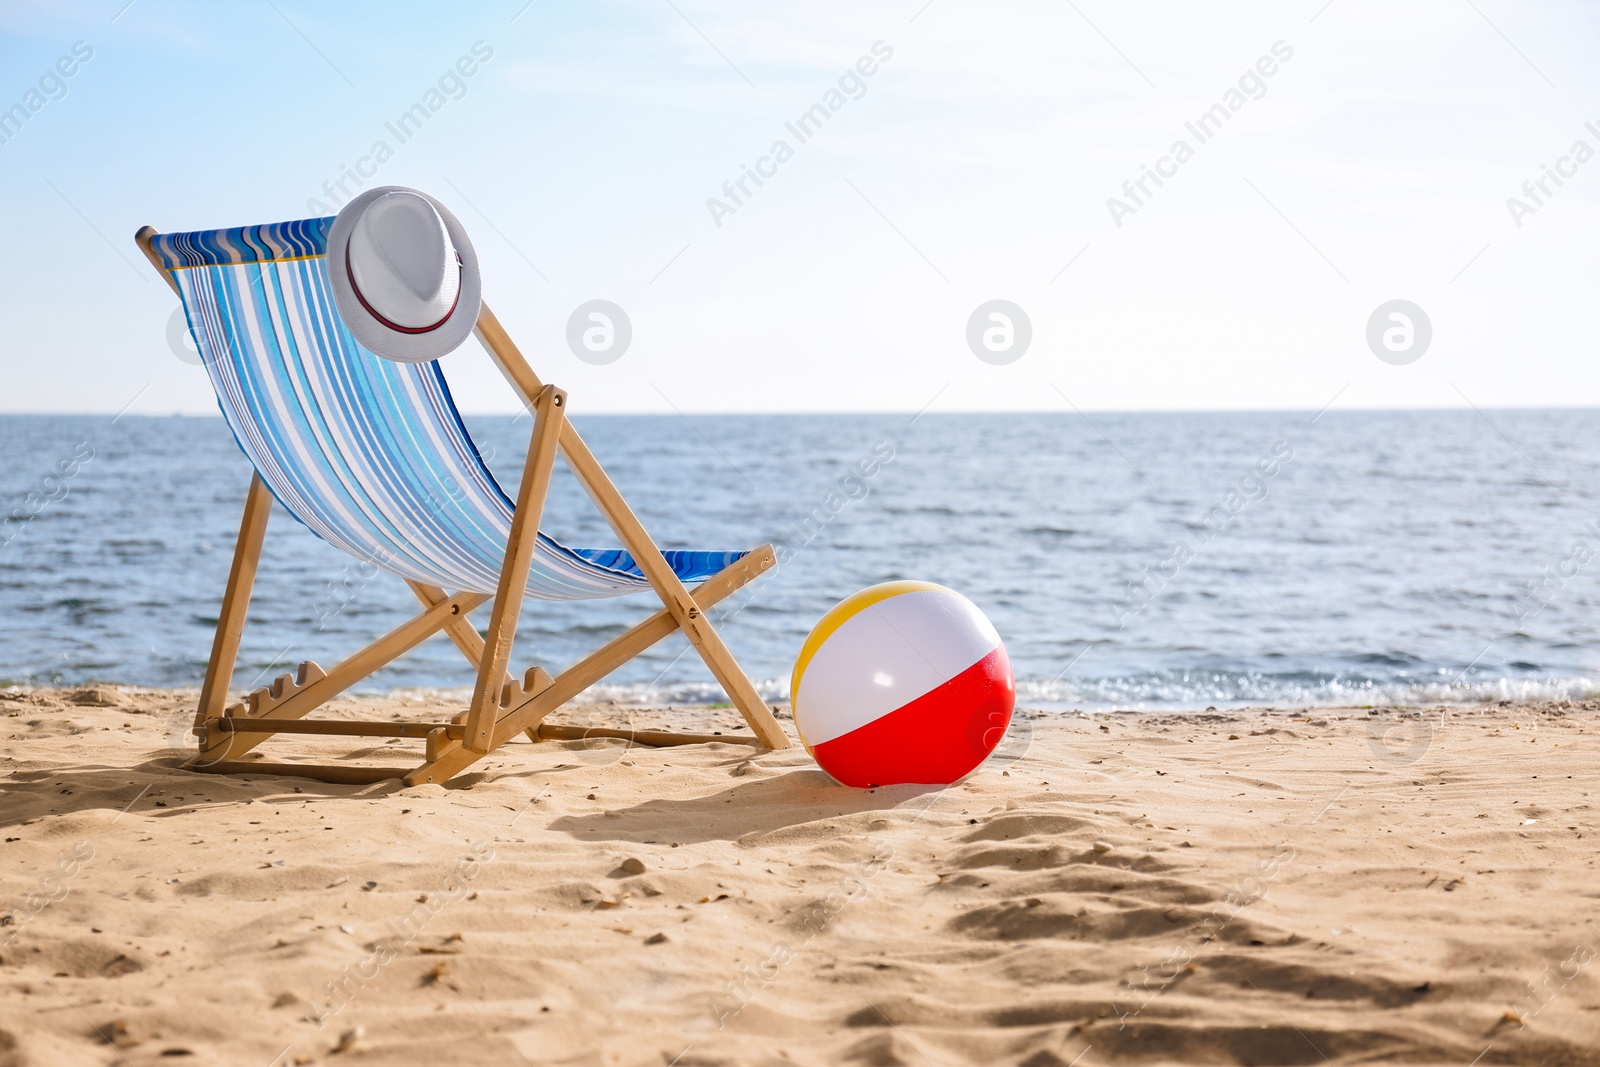 Photo of Lounger, hat and inflatable ball on sand near sea, space for text. Beach objects